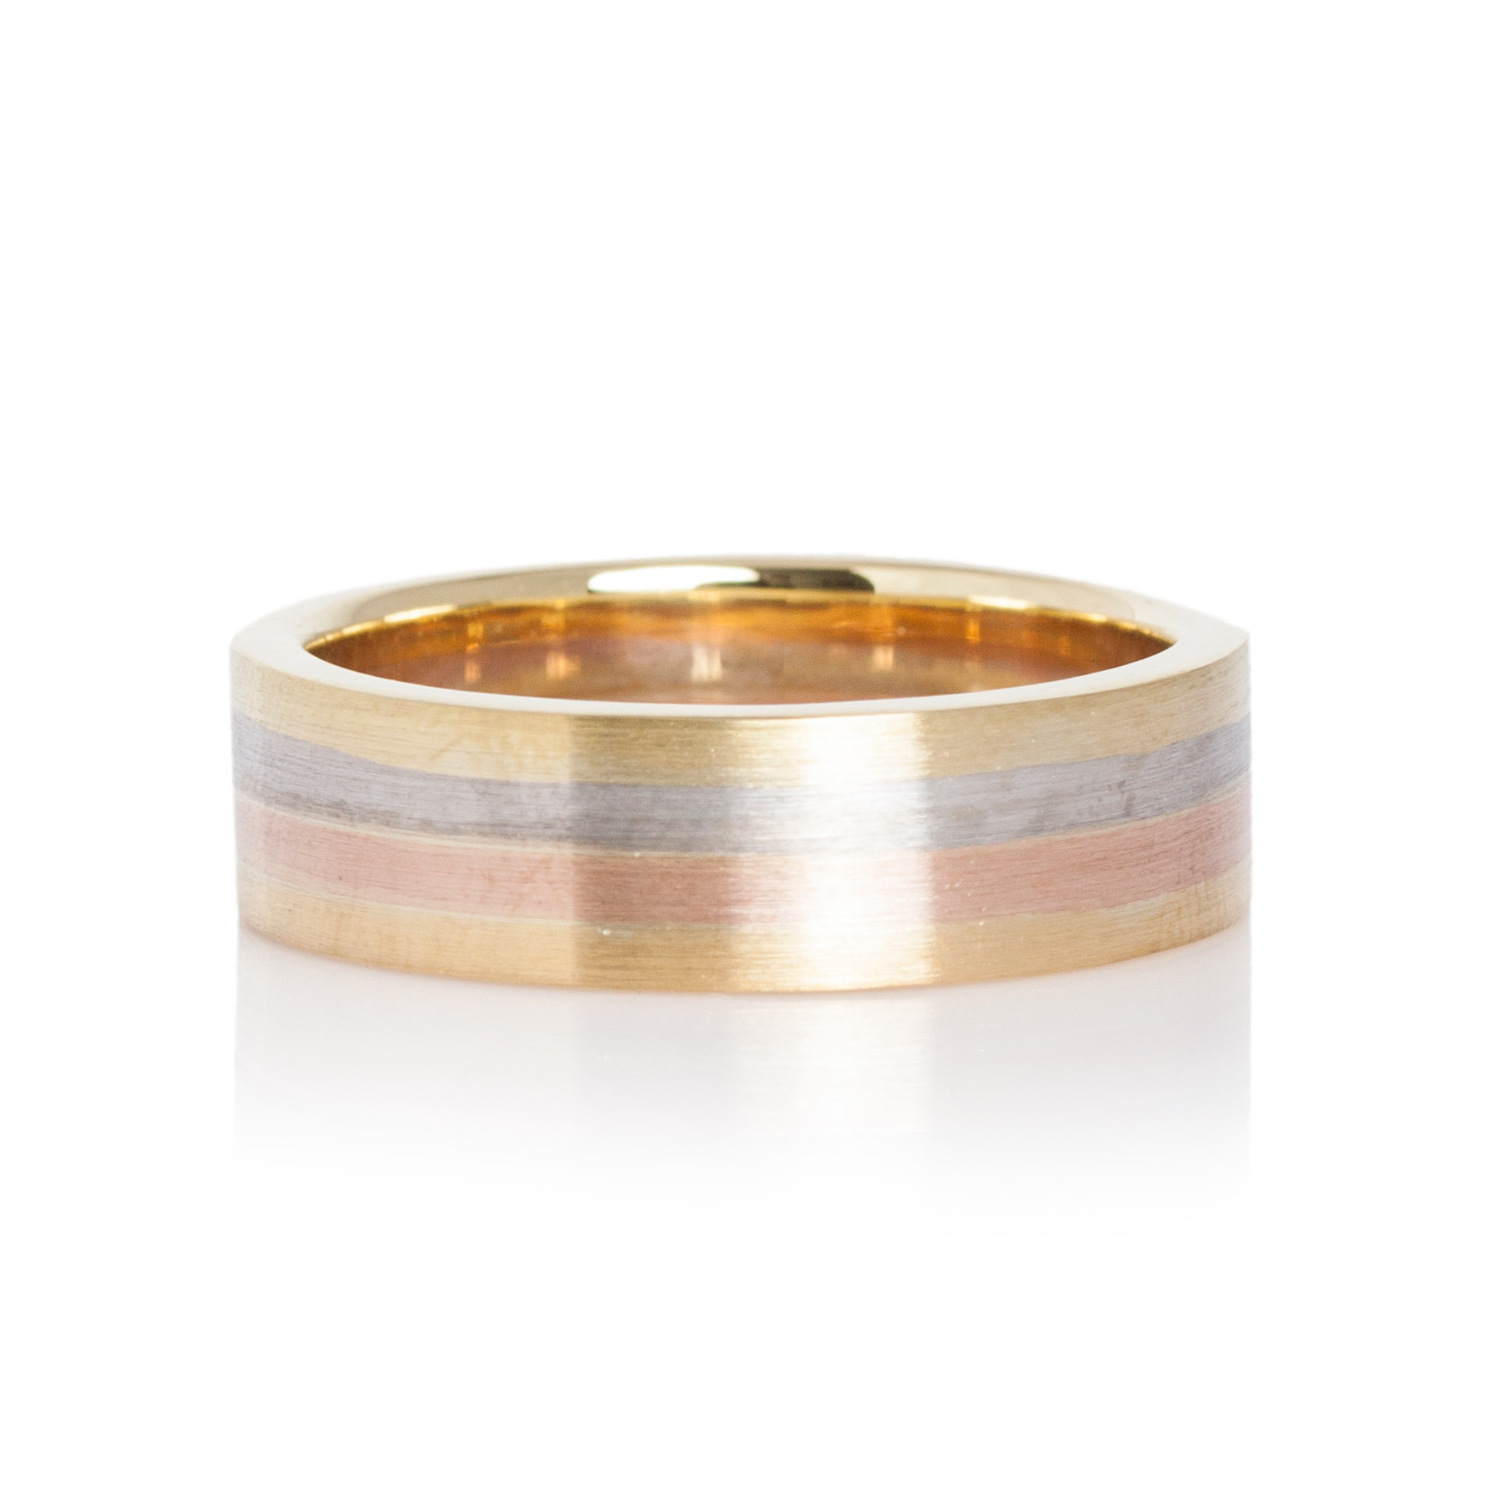 82-continental-jewels-manufacturers-ring-cjr000082-18k-yellow-gold-white-gold-rose-gold-customised-round-ring.jpg